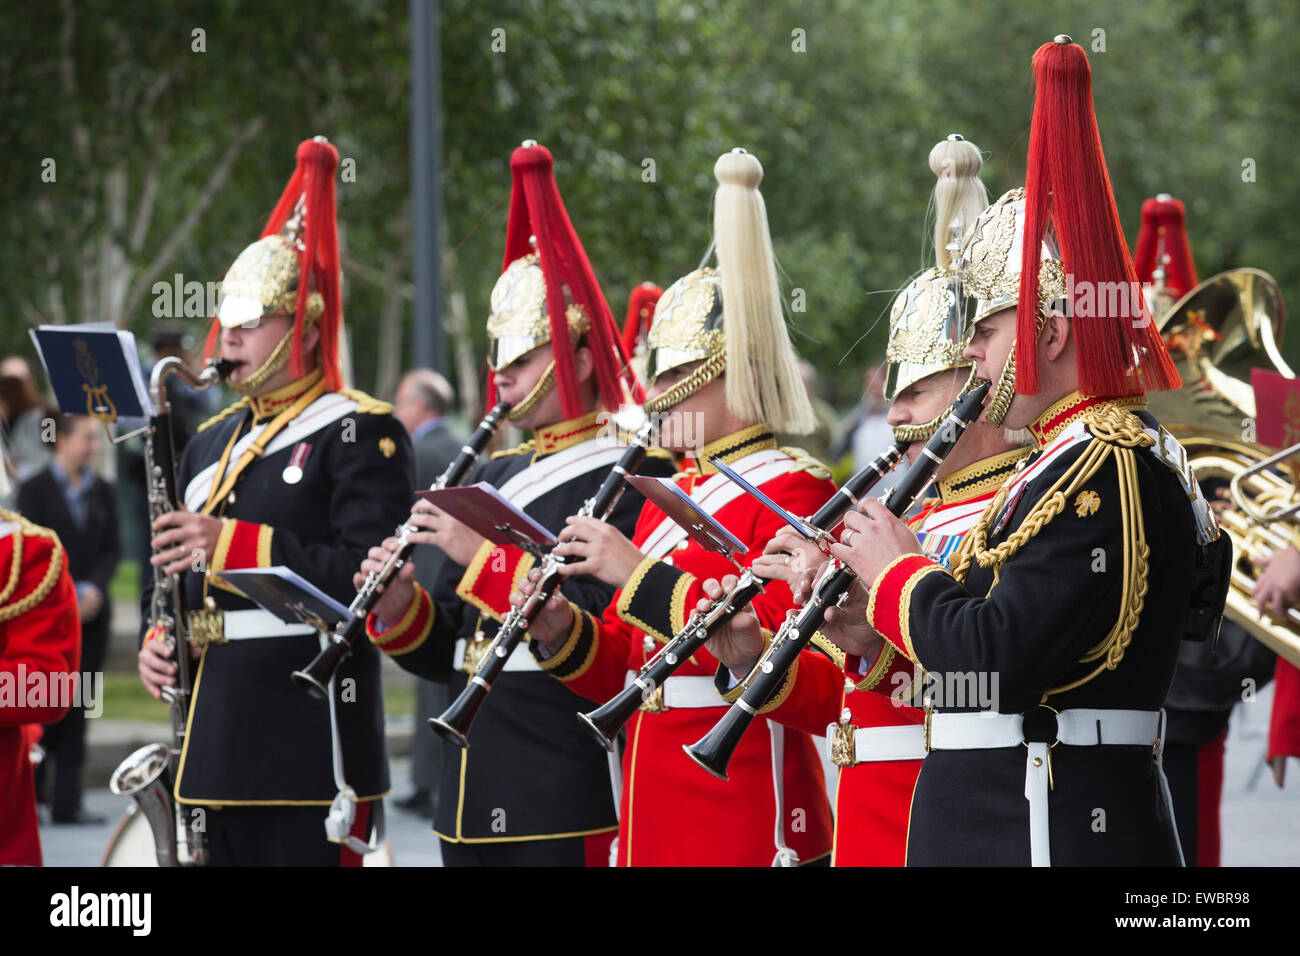 London, UK. 22 June 2015. A marching band at the event. Boris Johnson, the Mayor of London, and London Assembly members joined British Armed Forces personnel for a flag raising ceremony at City Hall to honour the bravery and commitment of service personnel past and present ahead of Armed Forces Day. Credit:  Nick Savage/Alamy Live News Stock Photo